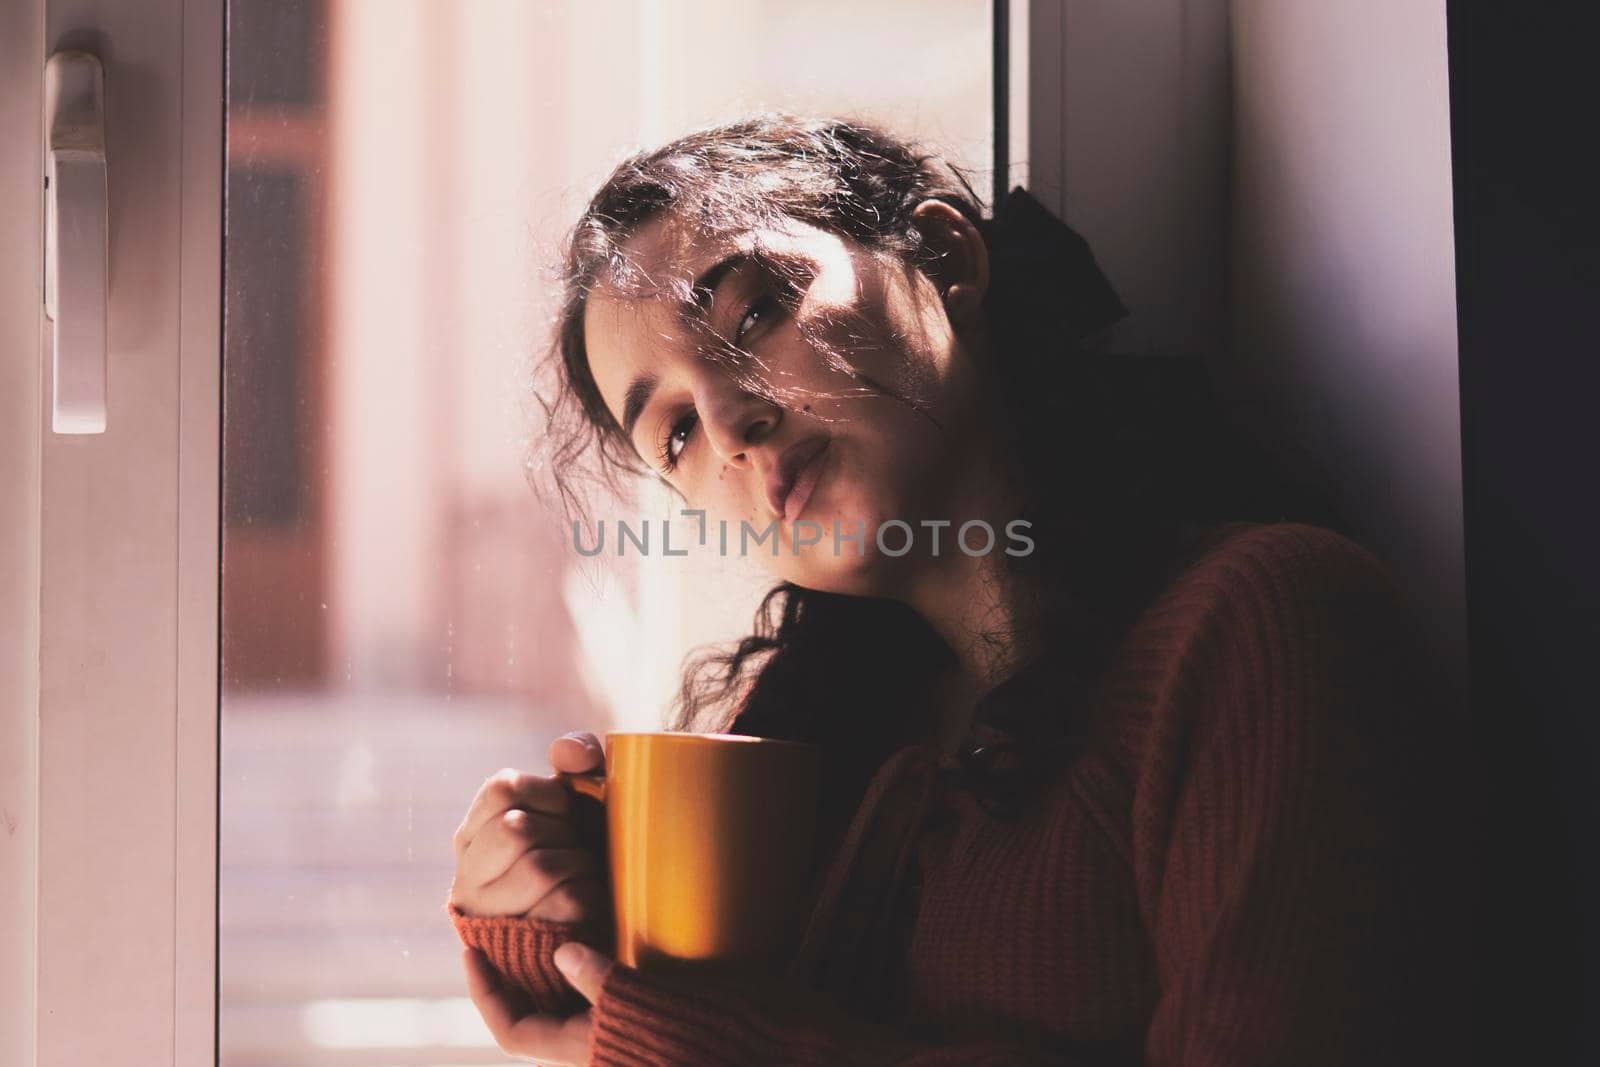 Cold autumn days - a young multi-racial female drinks coffee in a cozy windowsill. Middle-eastern or mixed-race woman enjoys weekend drinking hot tea near the windows